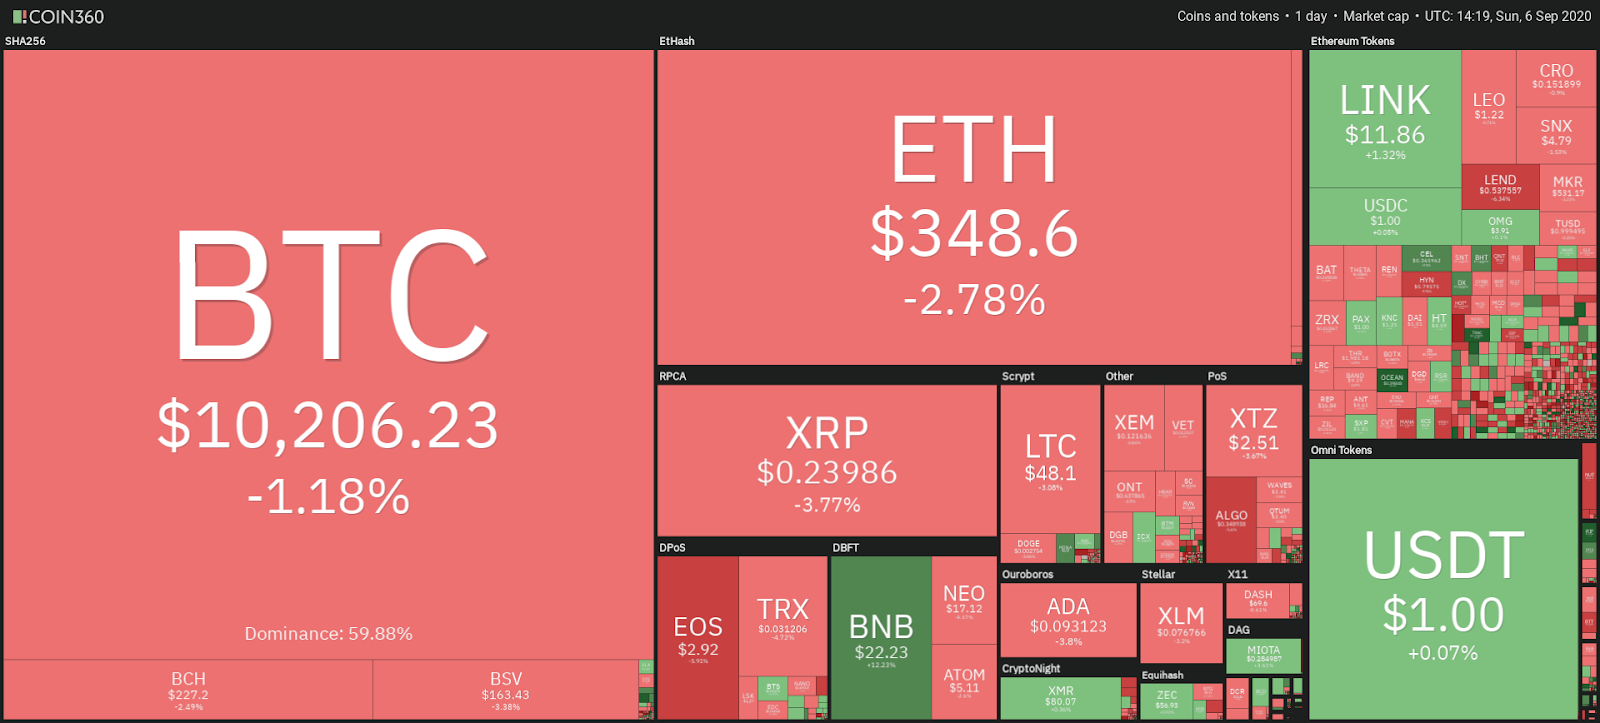 Daily cryptocurrency market snapshot, Sep. 4. Source: Coin360.com